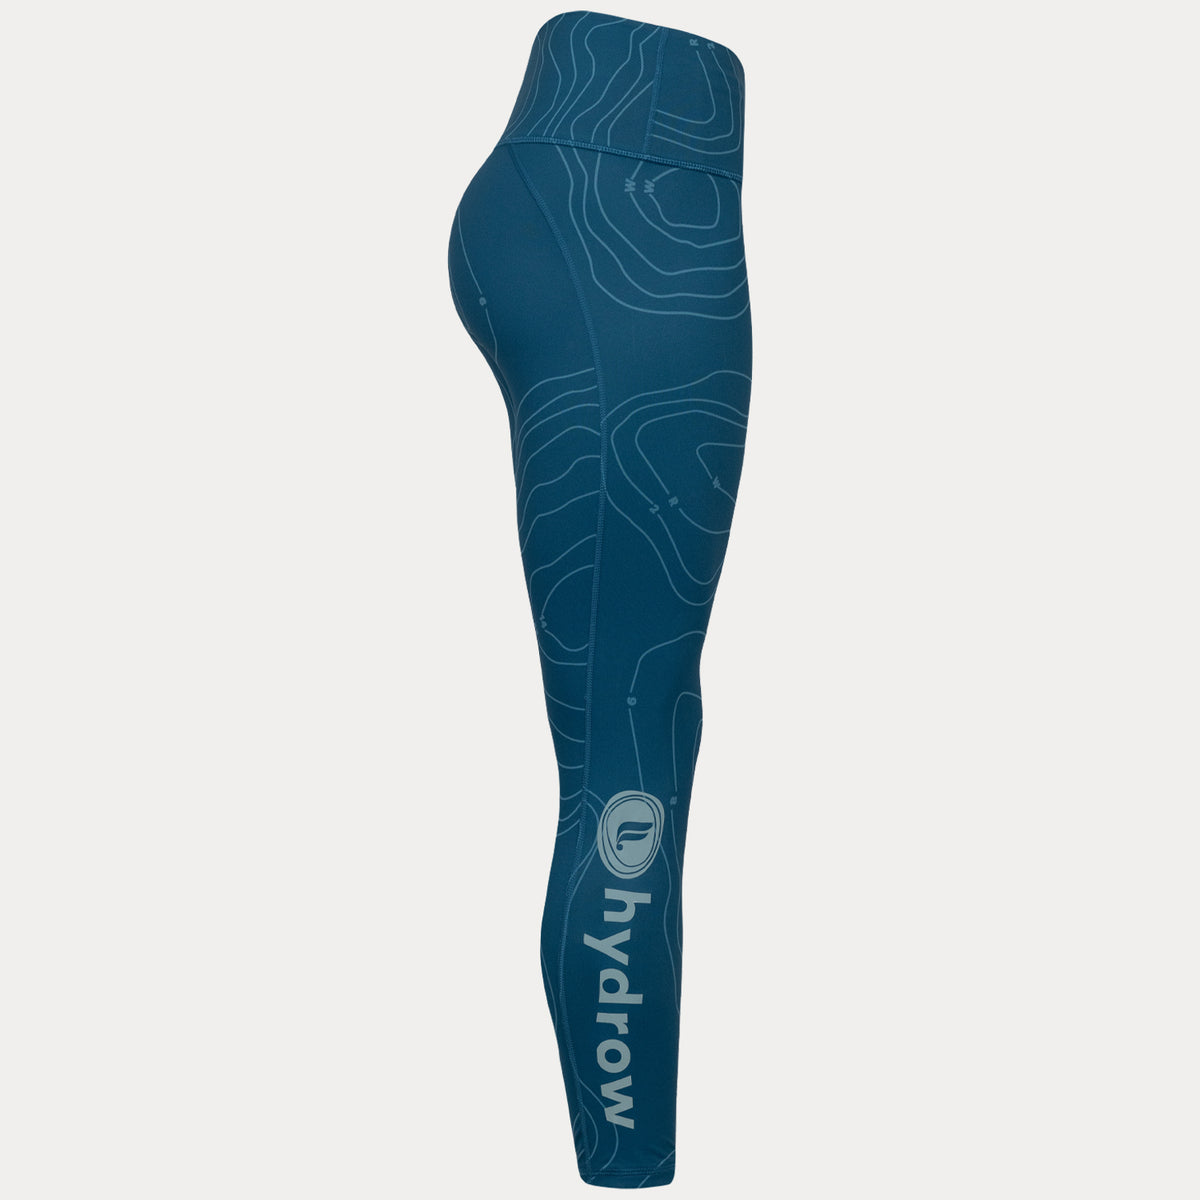 side view of Dark blue high waisted 7/8 legging with light blue bathymetic line pattern showing hydrow logo on right calf